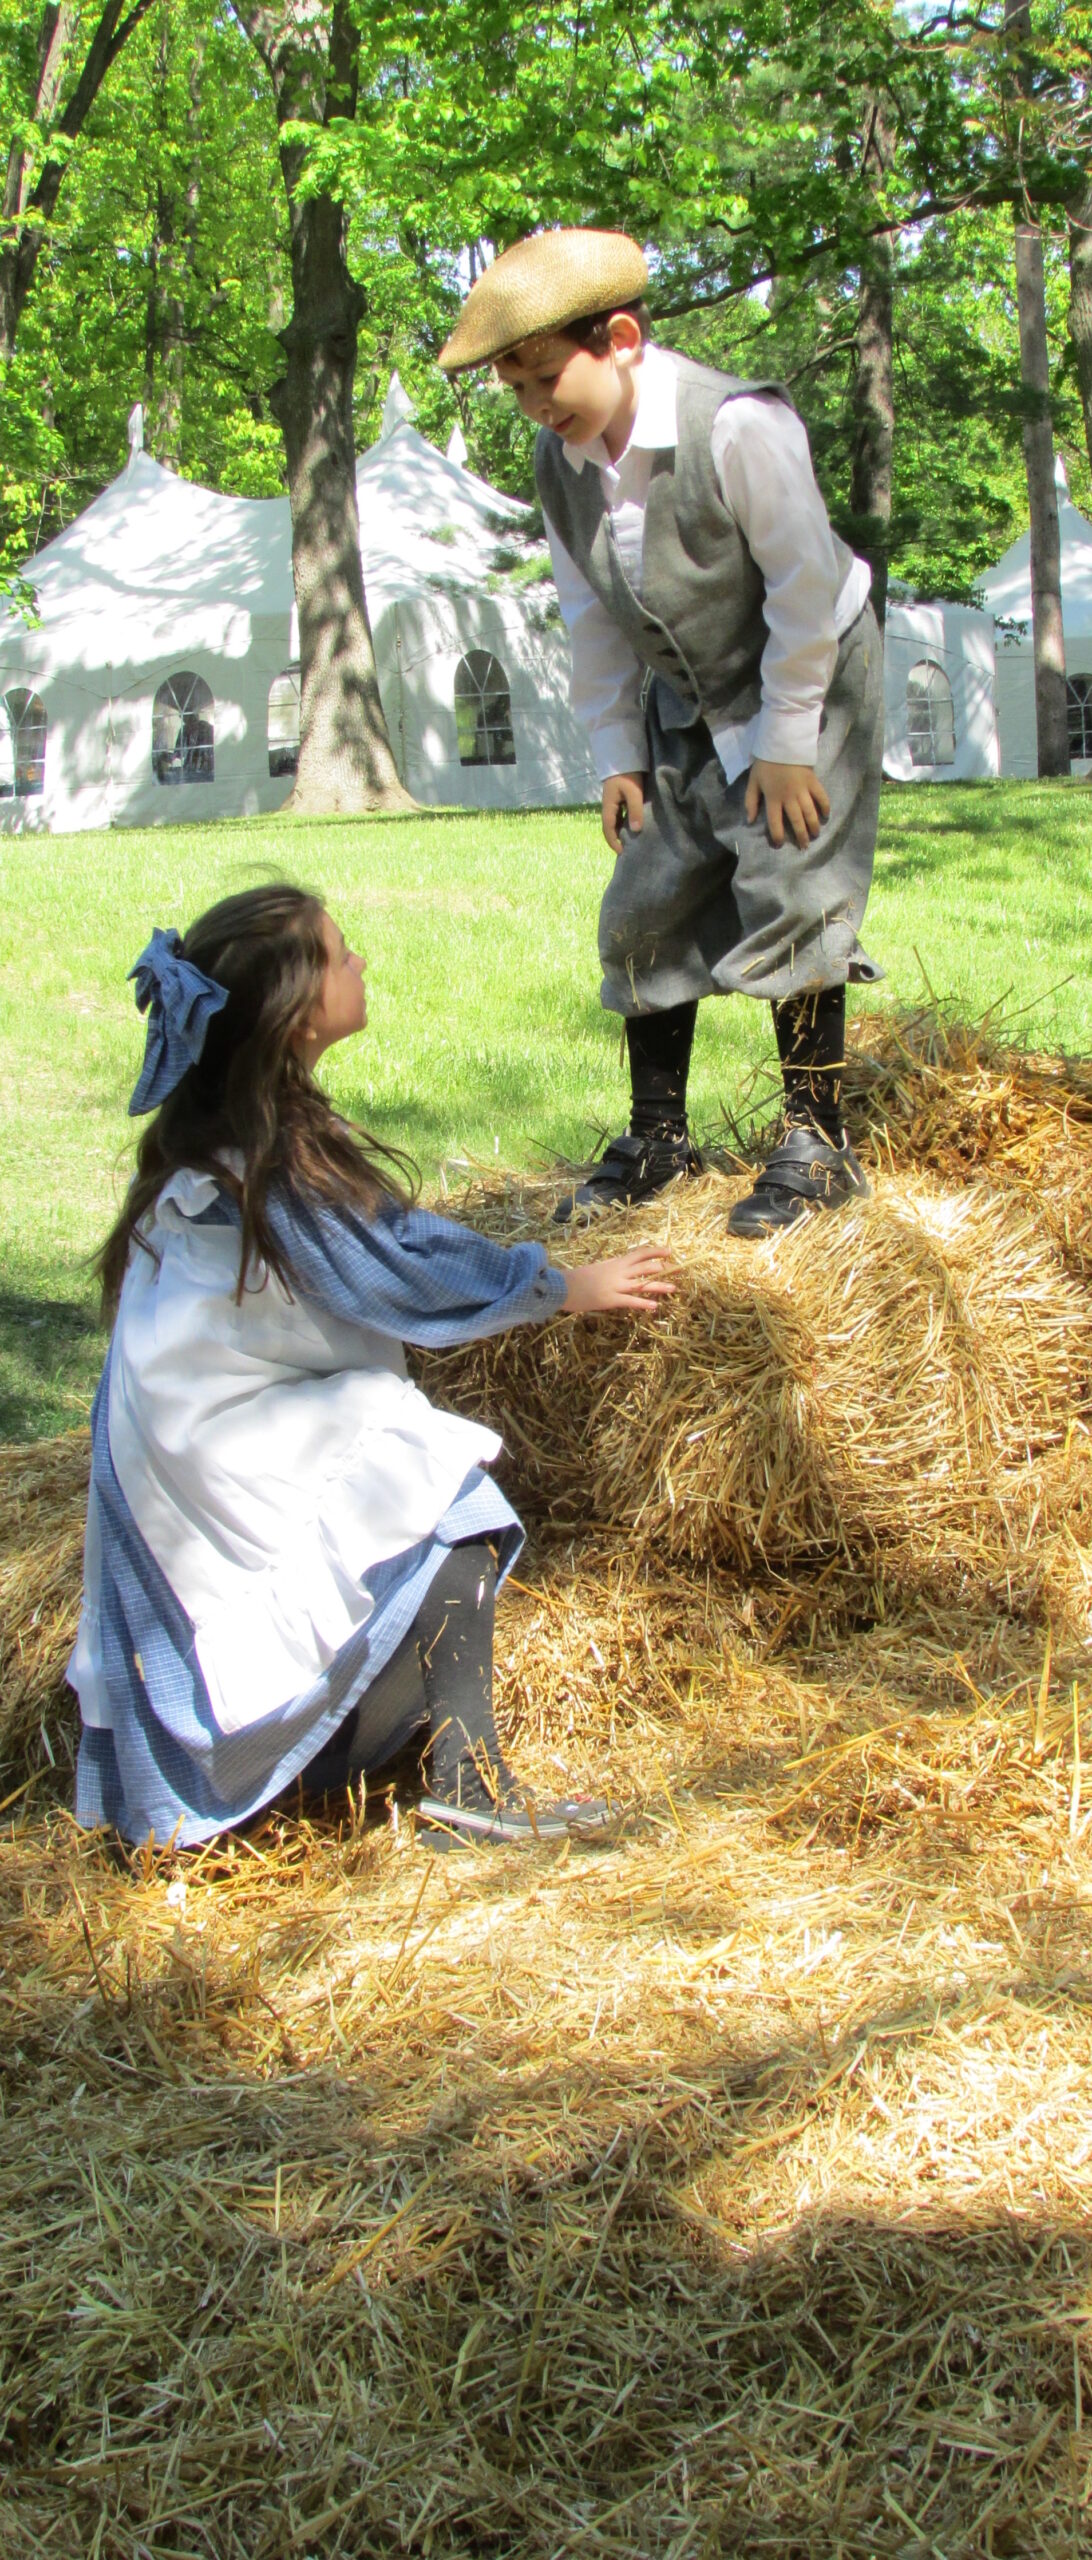 Children in Costume, Playing at The Greater Rochester Heritage Days Festival in Rochester, Michigan!